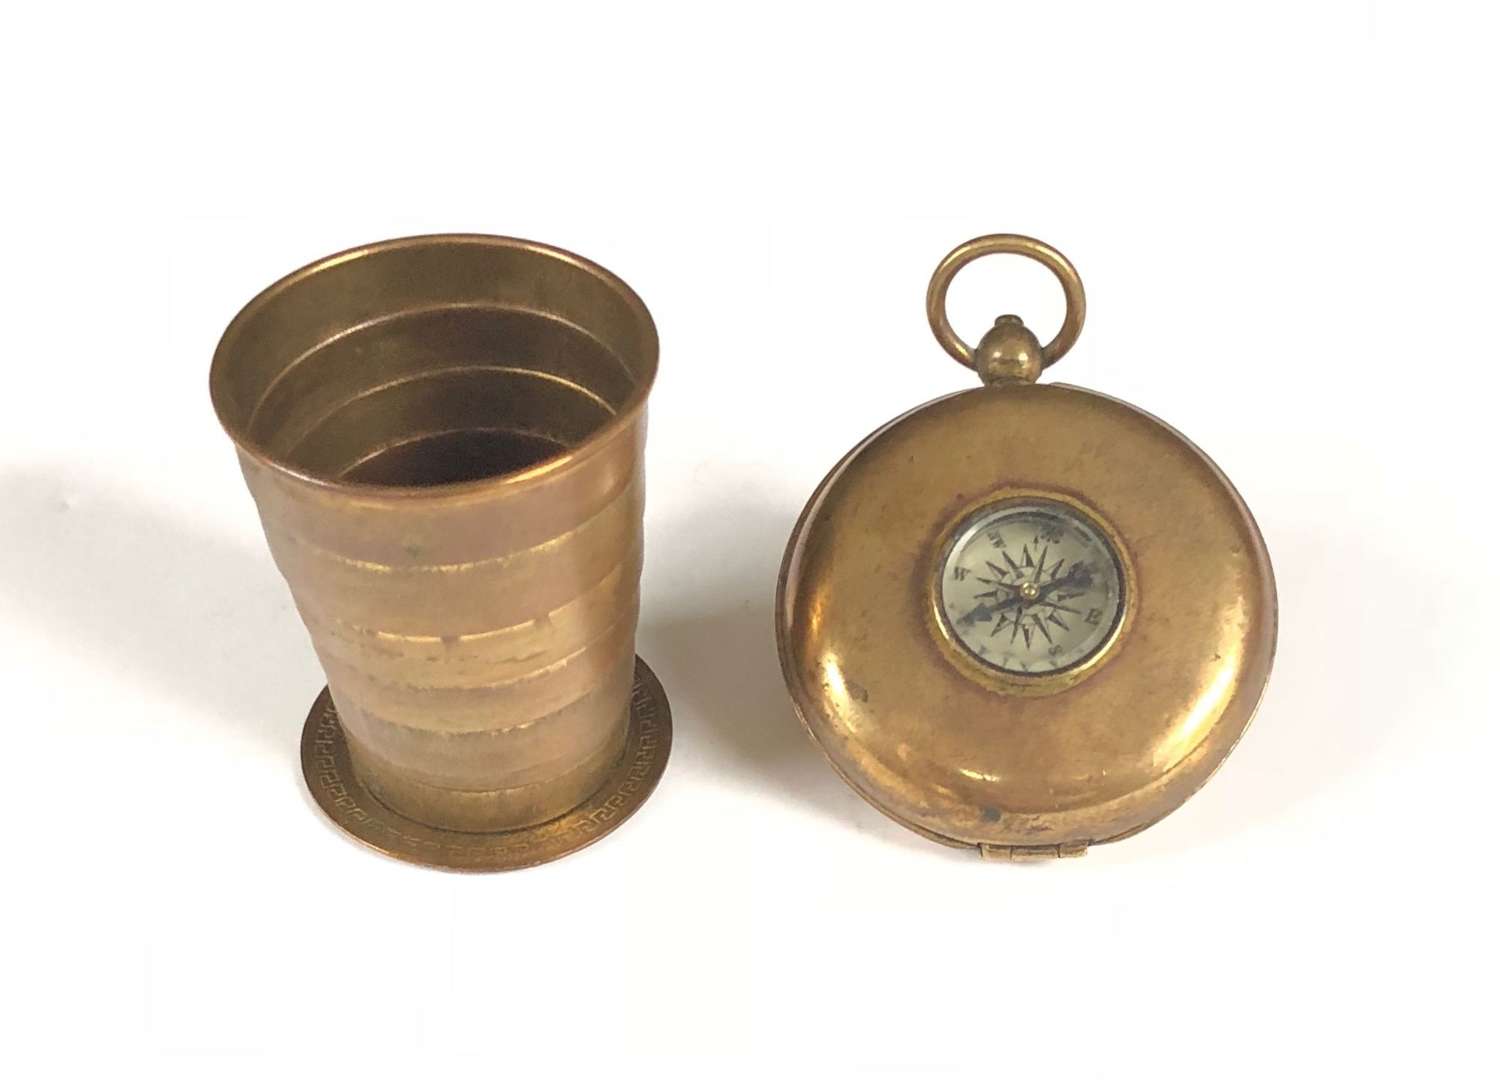 Boer War / WW1 Pocket Watch Size Collapsible TOT Cup.